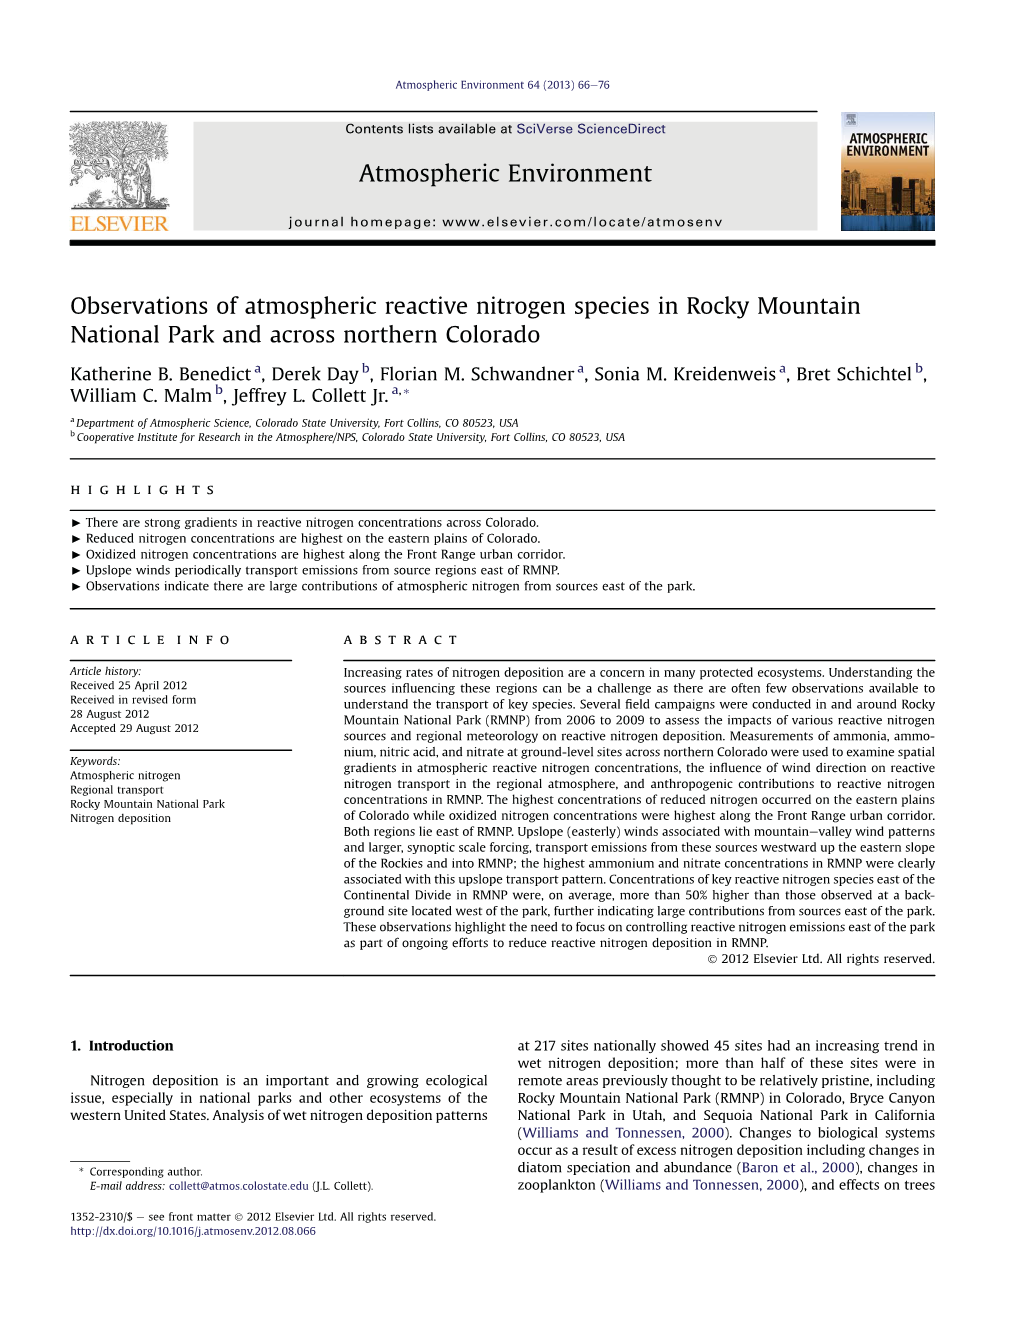 Observations of Atmospheric Reactive Nitrogen Species in Rocky Mountain National Park and Across Northern Colorado